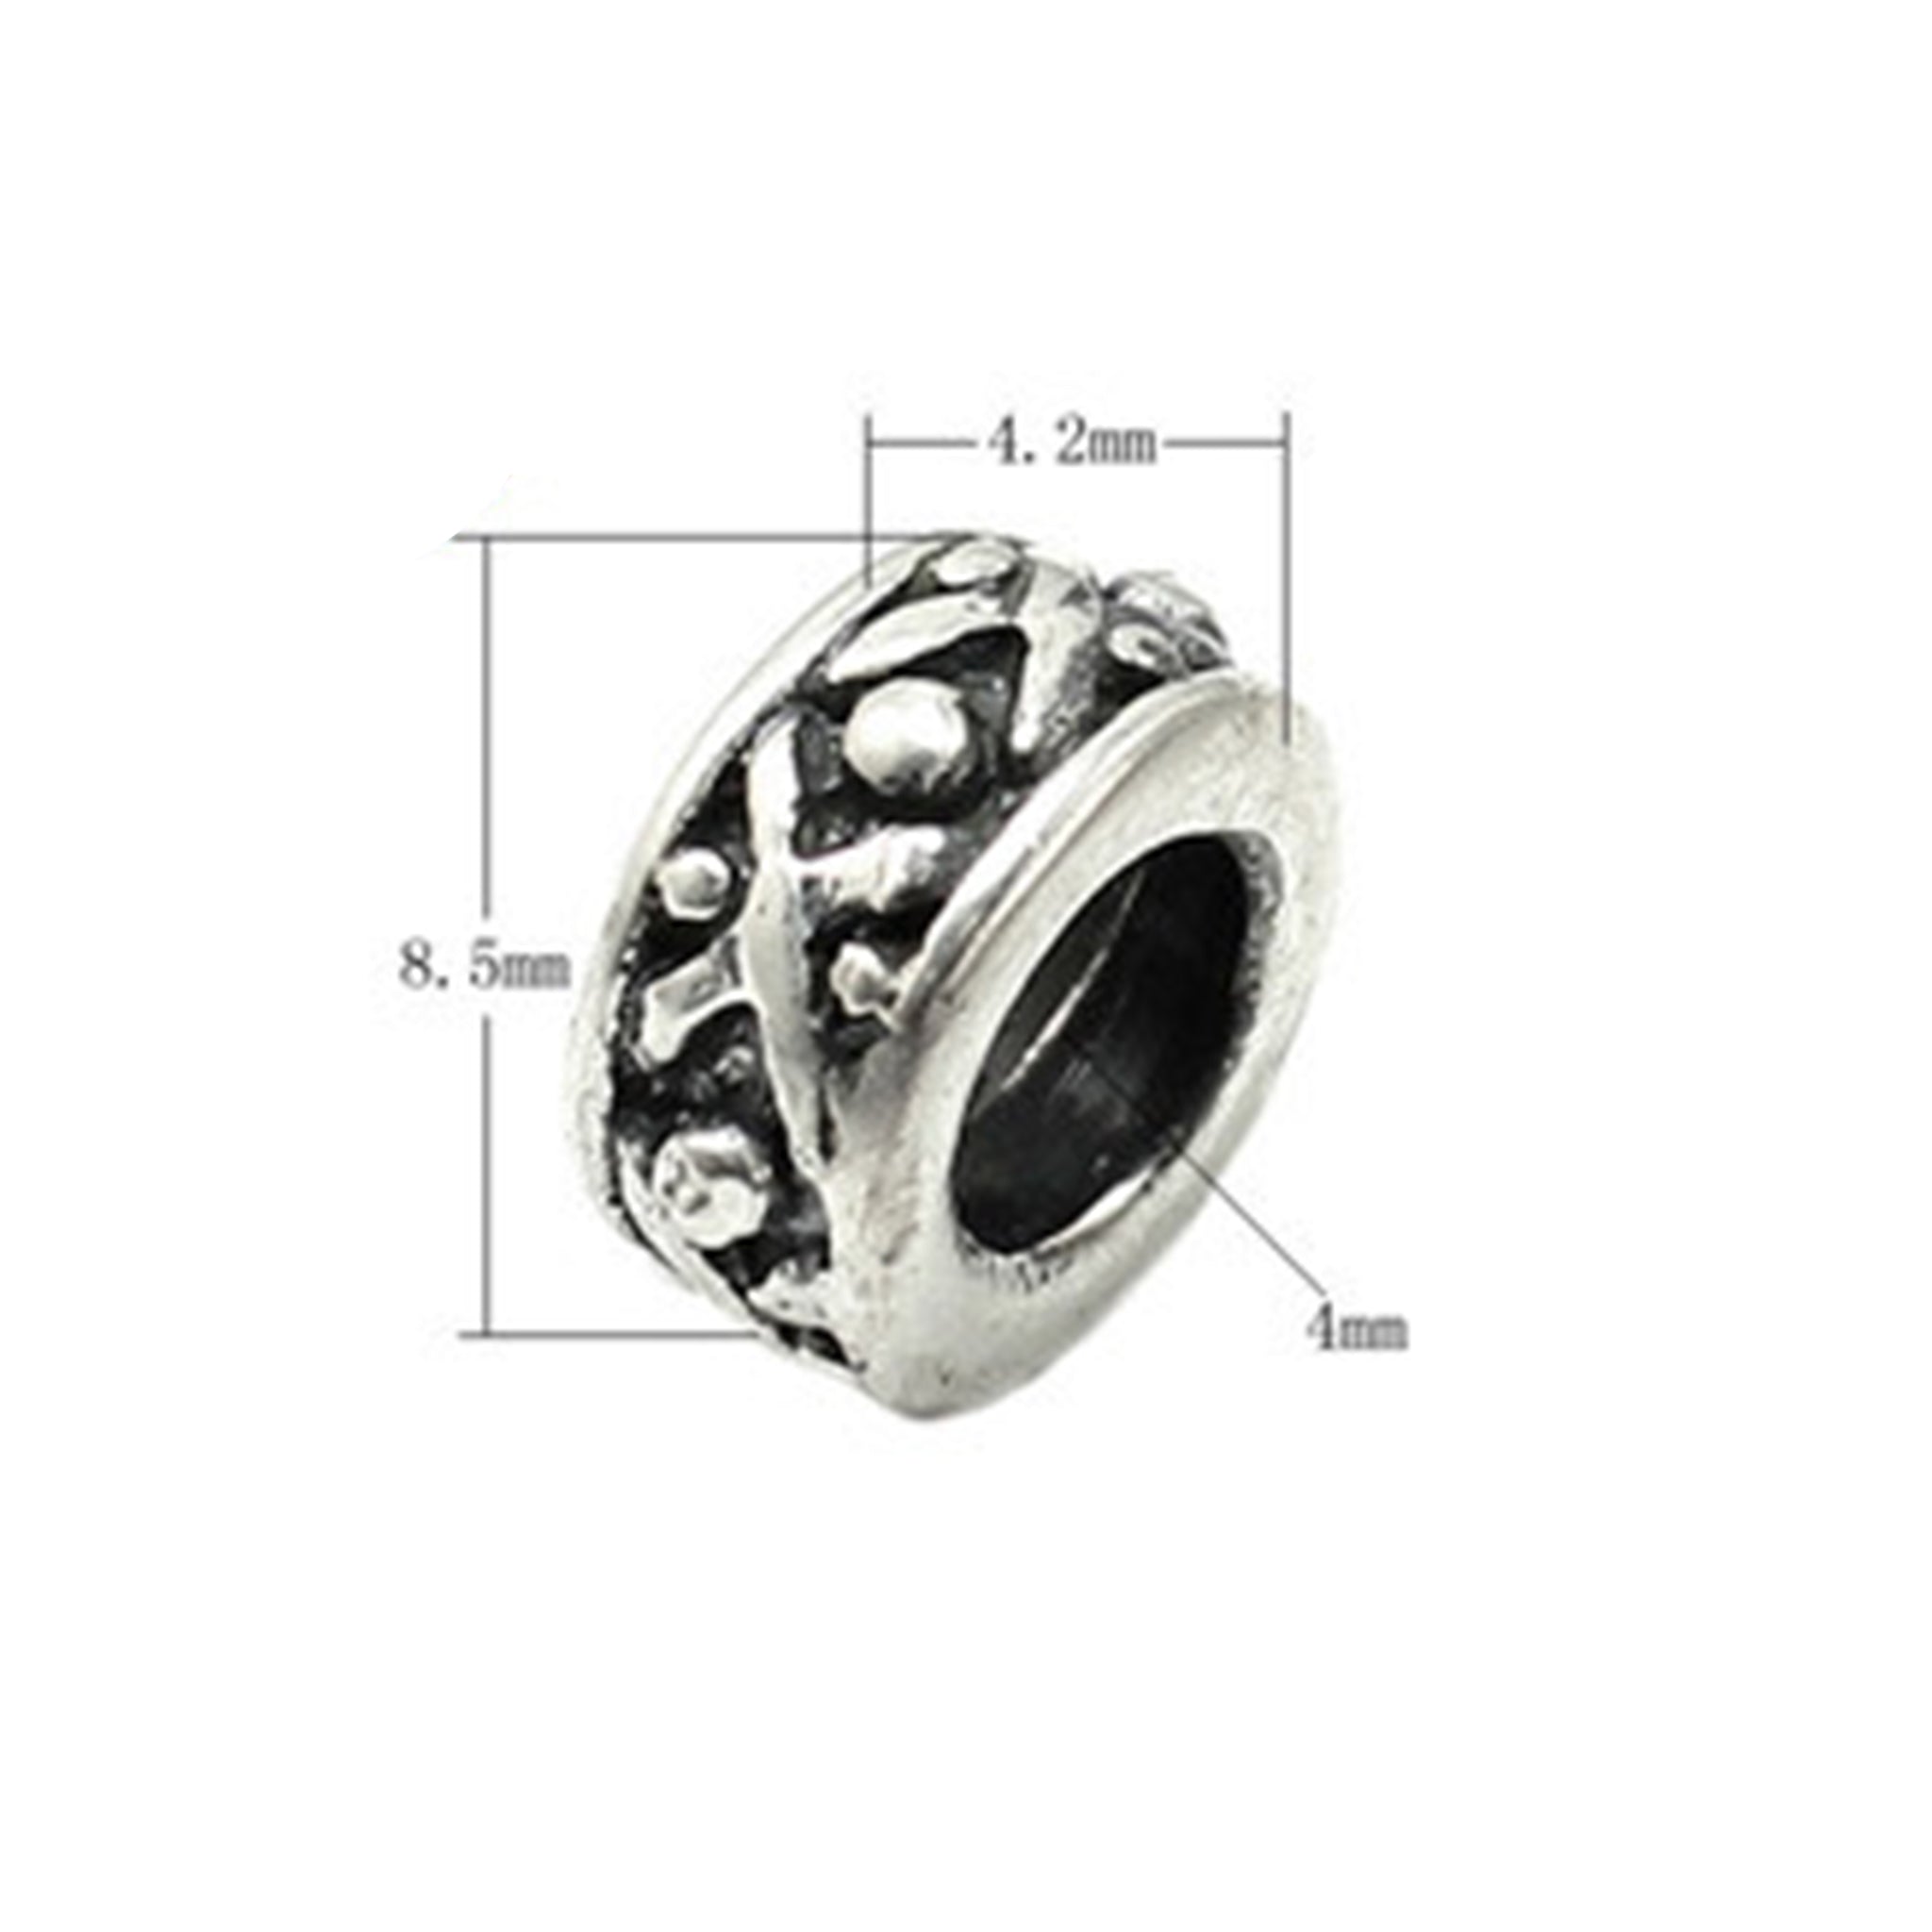 Granular X-Pattern Spacer Bead in Antique Sterling Silver 8.3x8.3x4.3mm